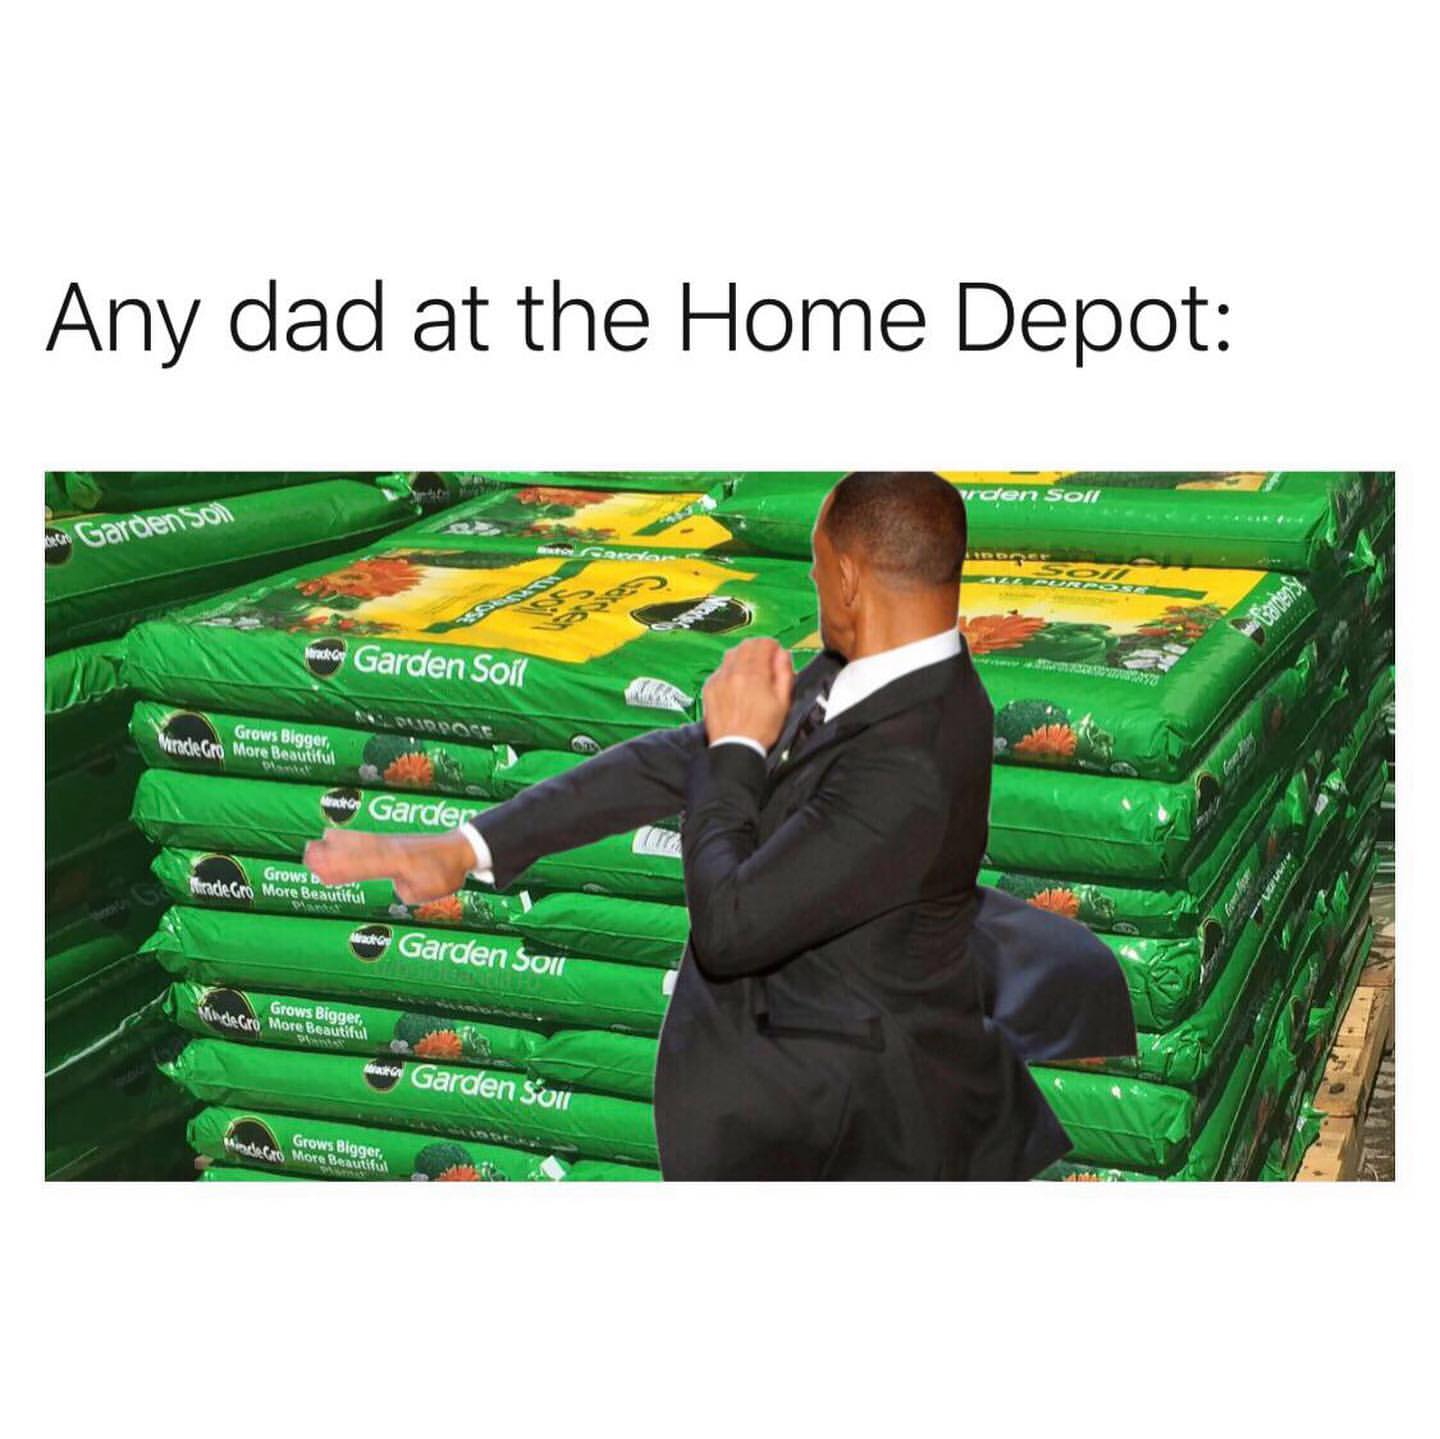 Any dad at the Home Depot: